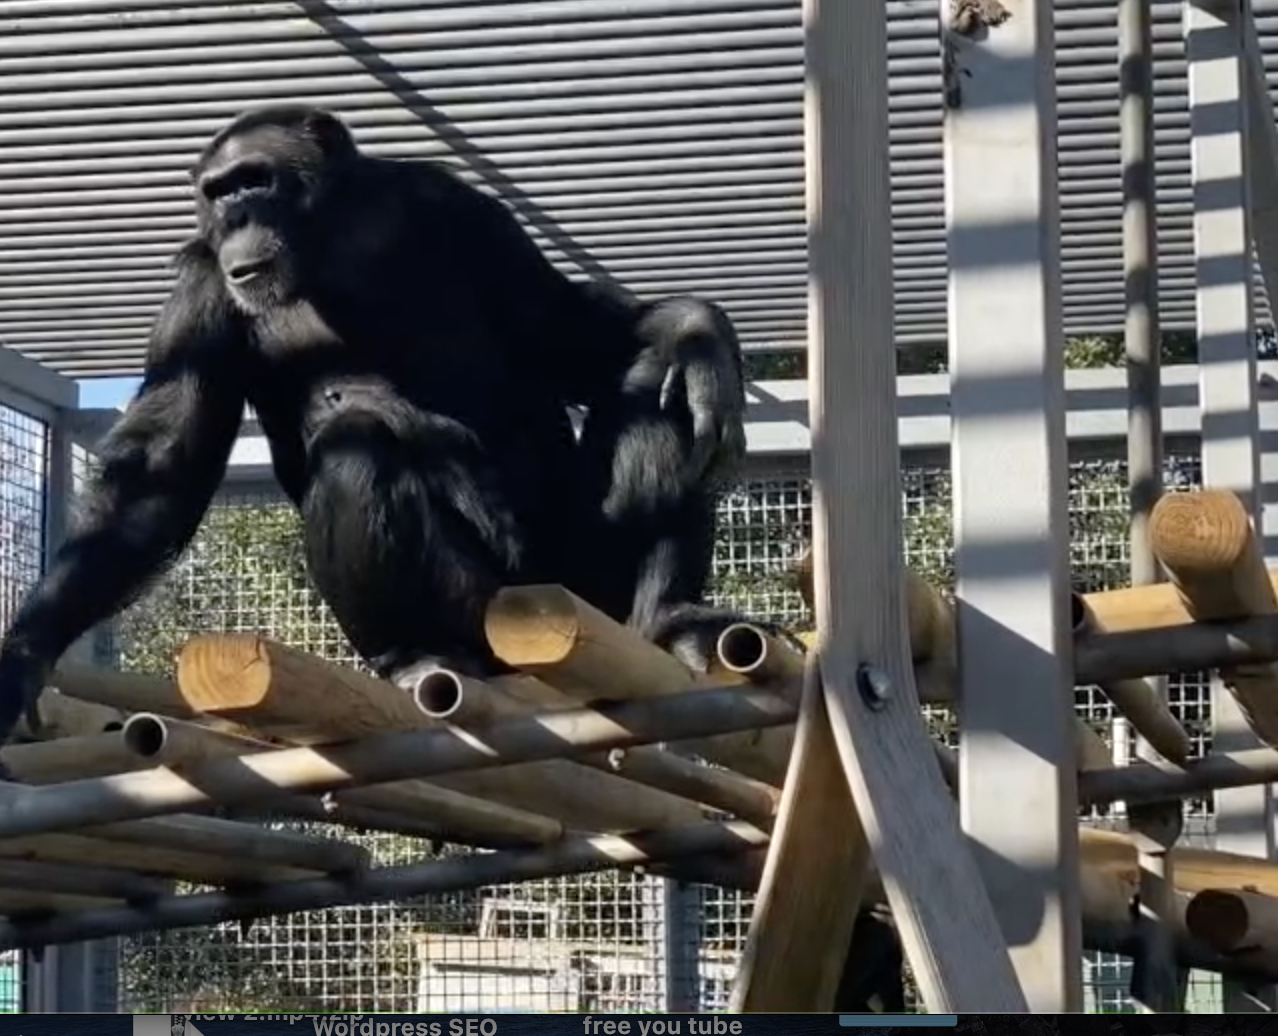 These chimps need your help